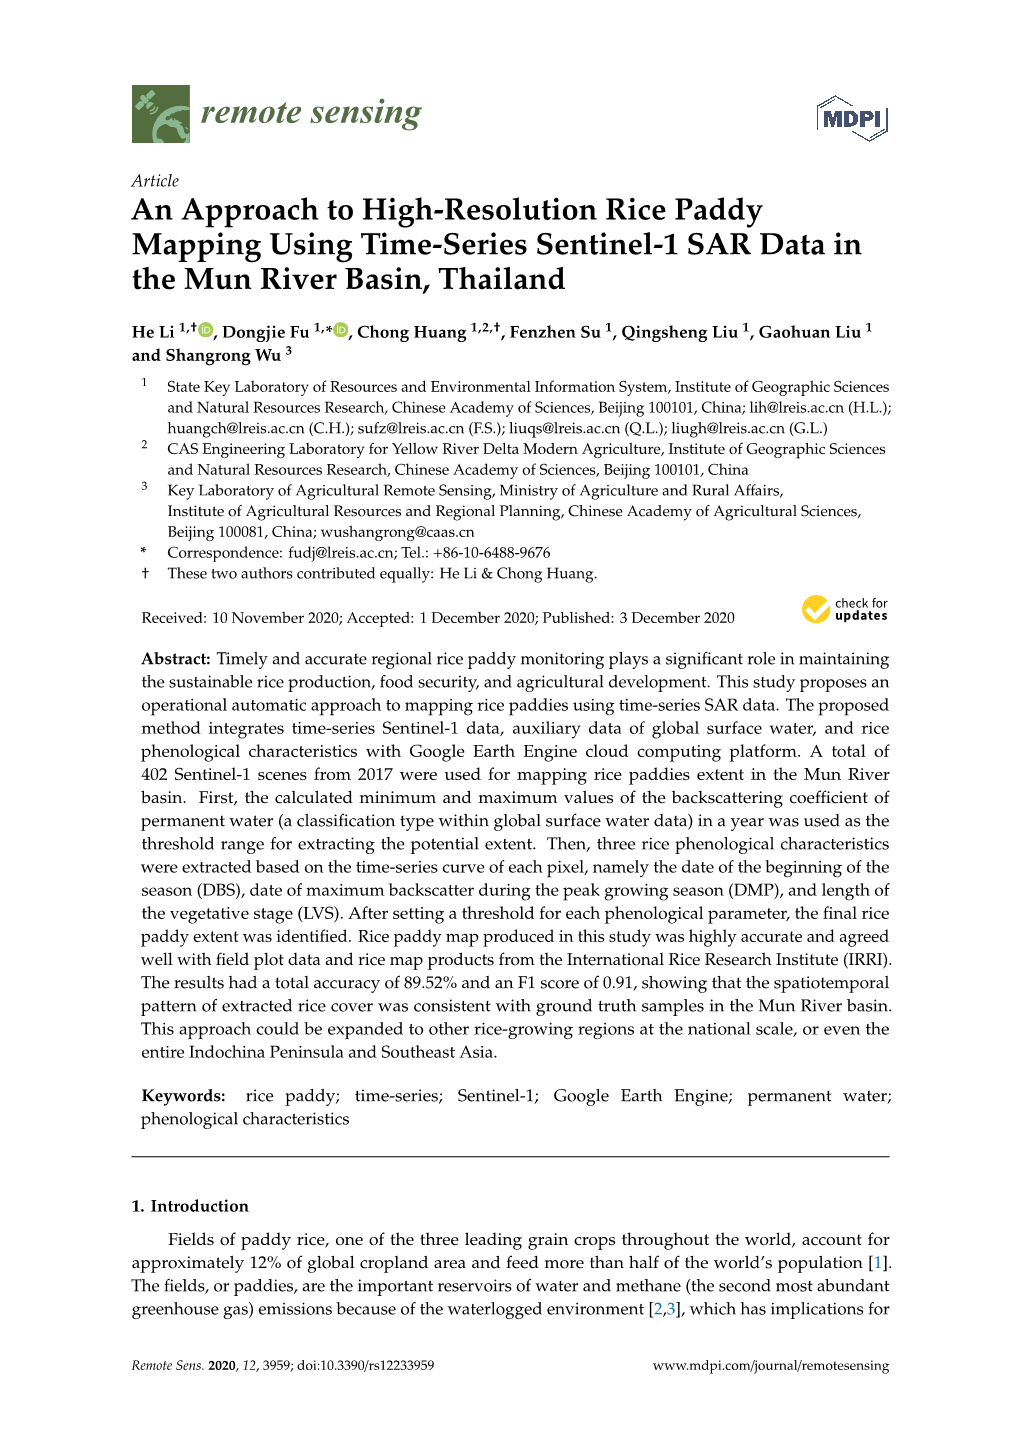 An Approach to High-Resolution Rice Paddy Mapping Using Time-Series Sentinel-1 SAR Data in the Mun River Basin, Thailand